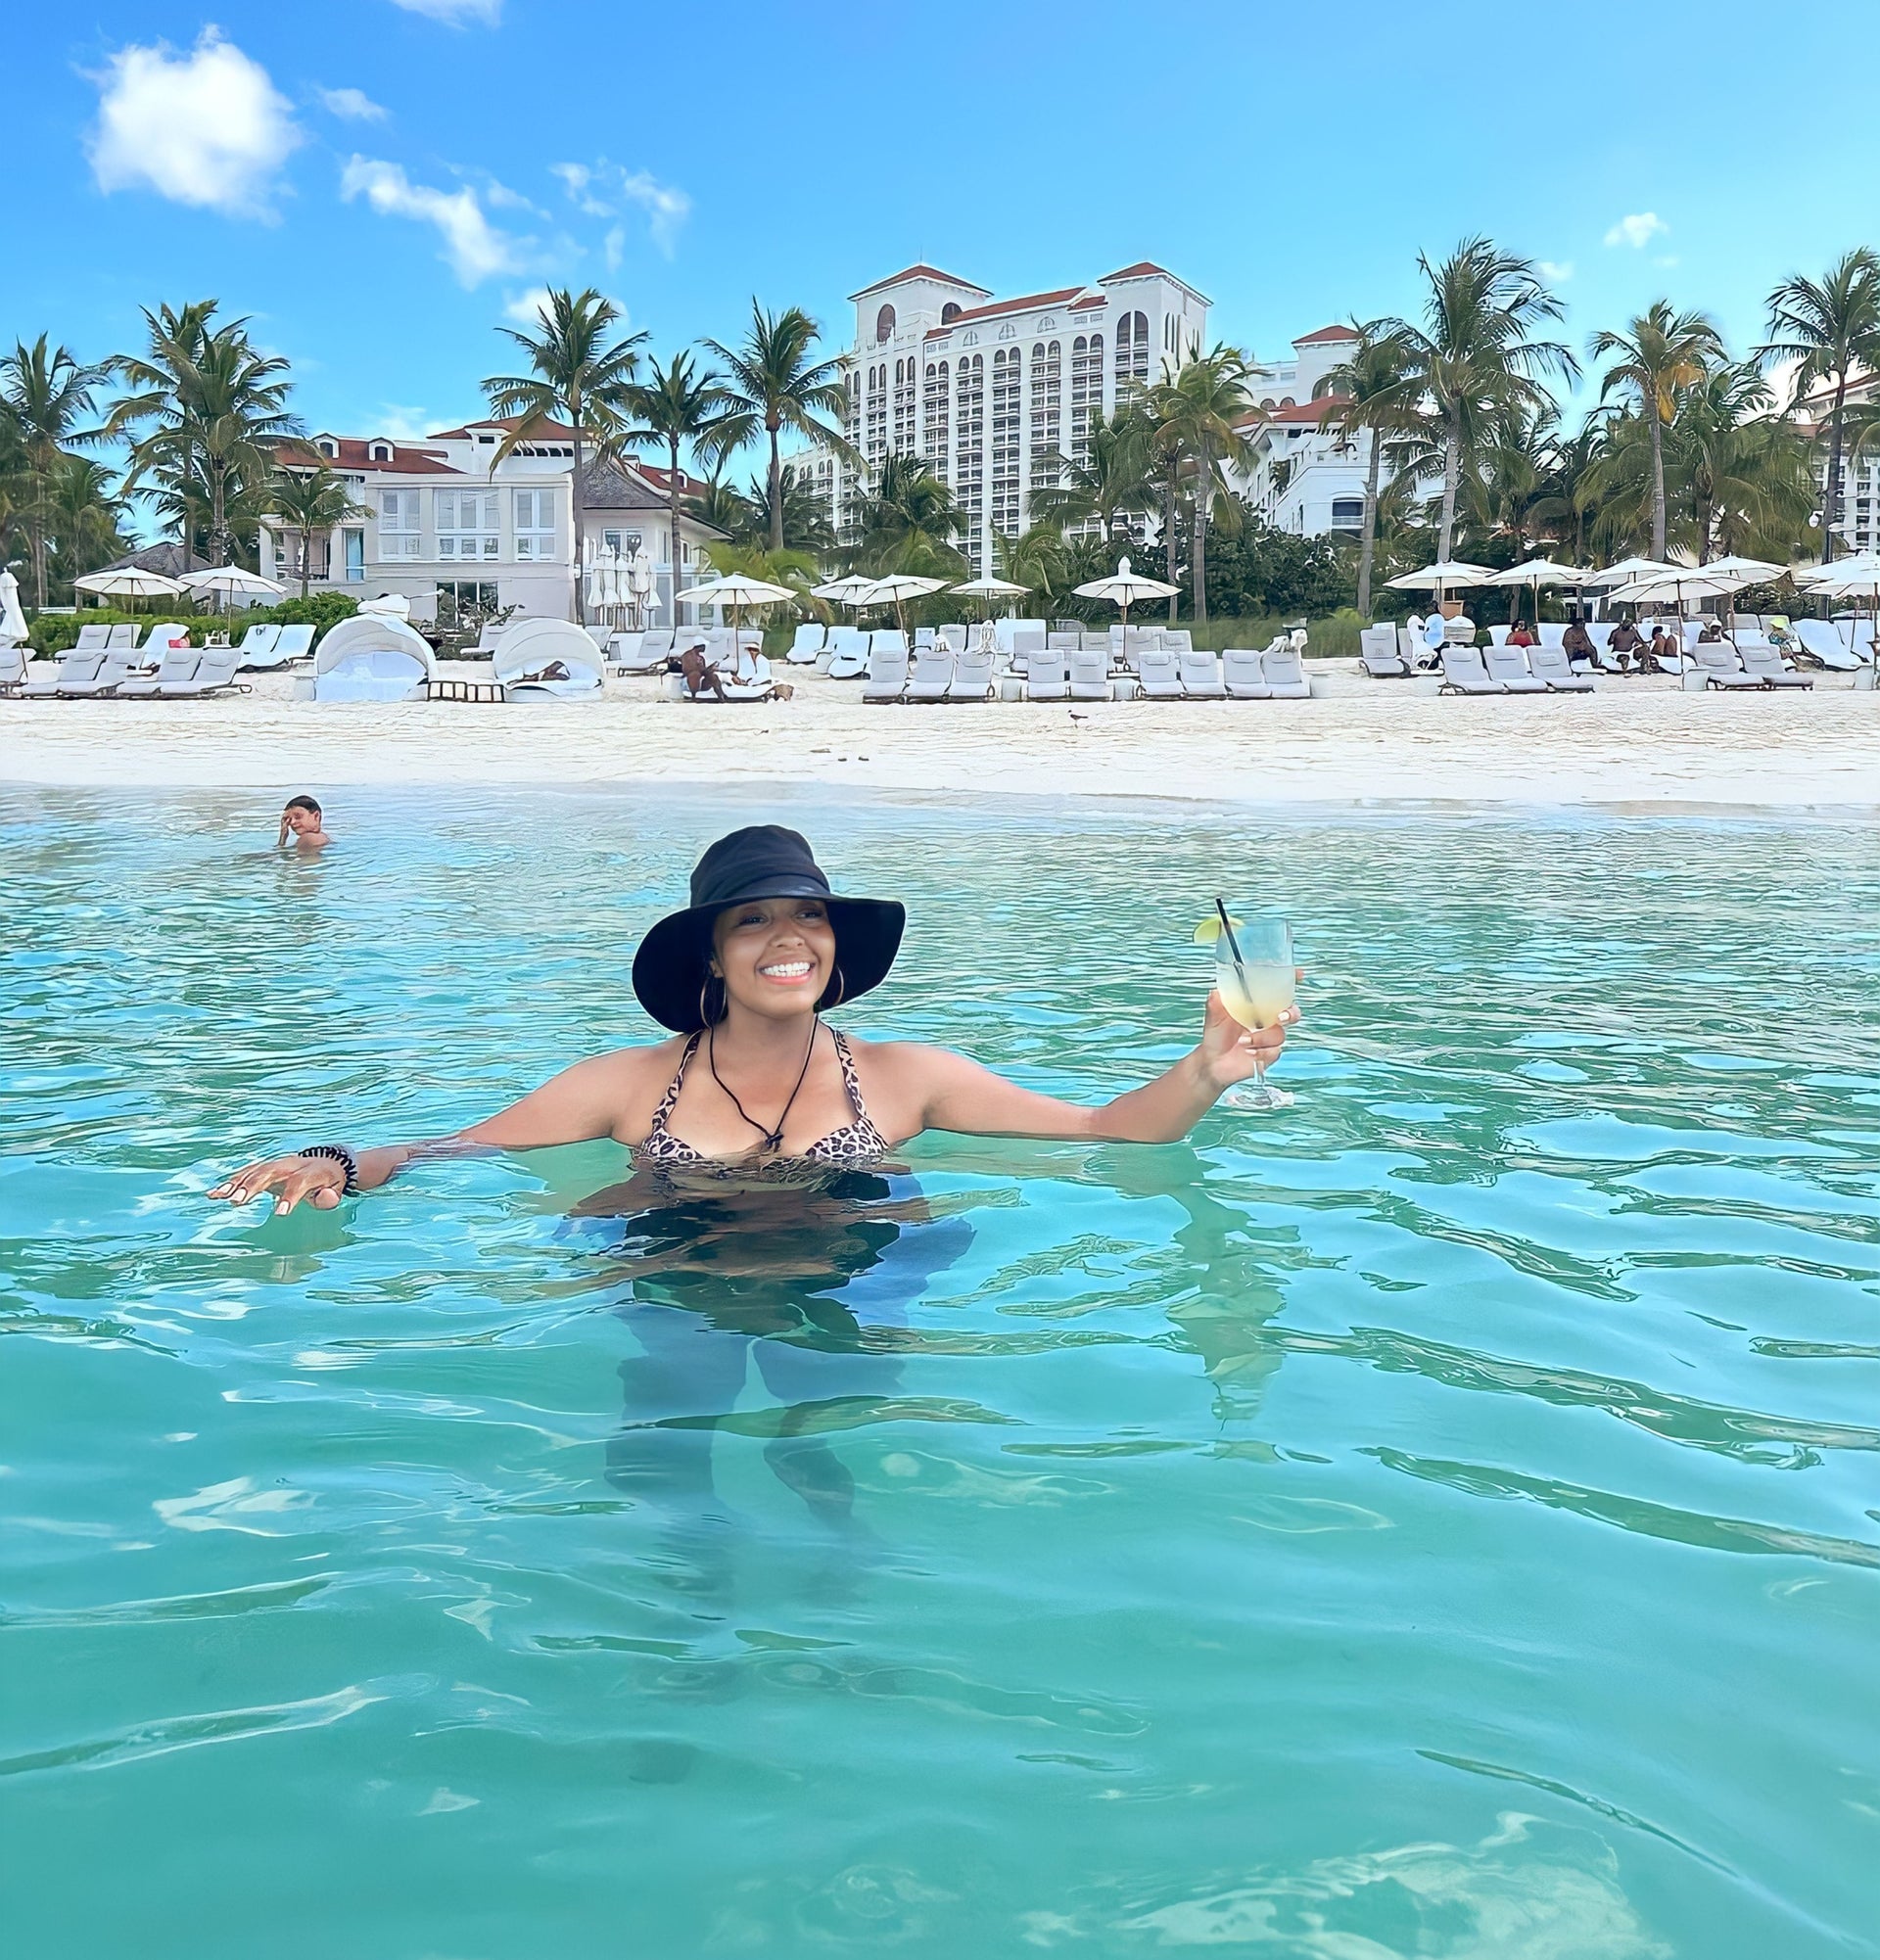 How My Trip to the Bahamas Turned into an Ultimate Hat Test ☀️